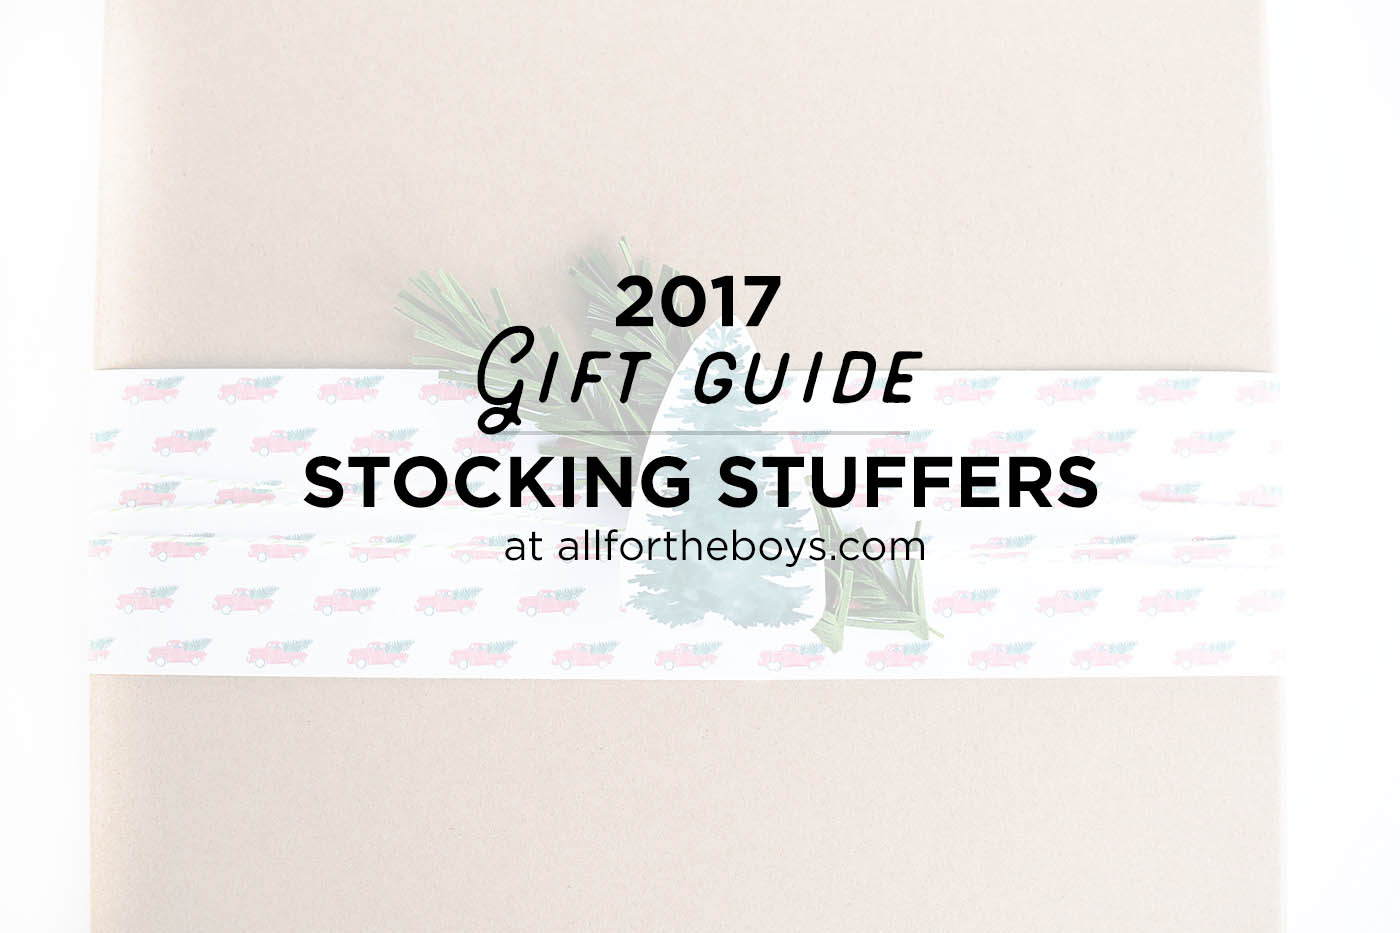 Lots of great last minute gift ideas in this gift guide of stocking stuffers